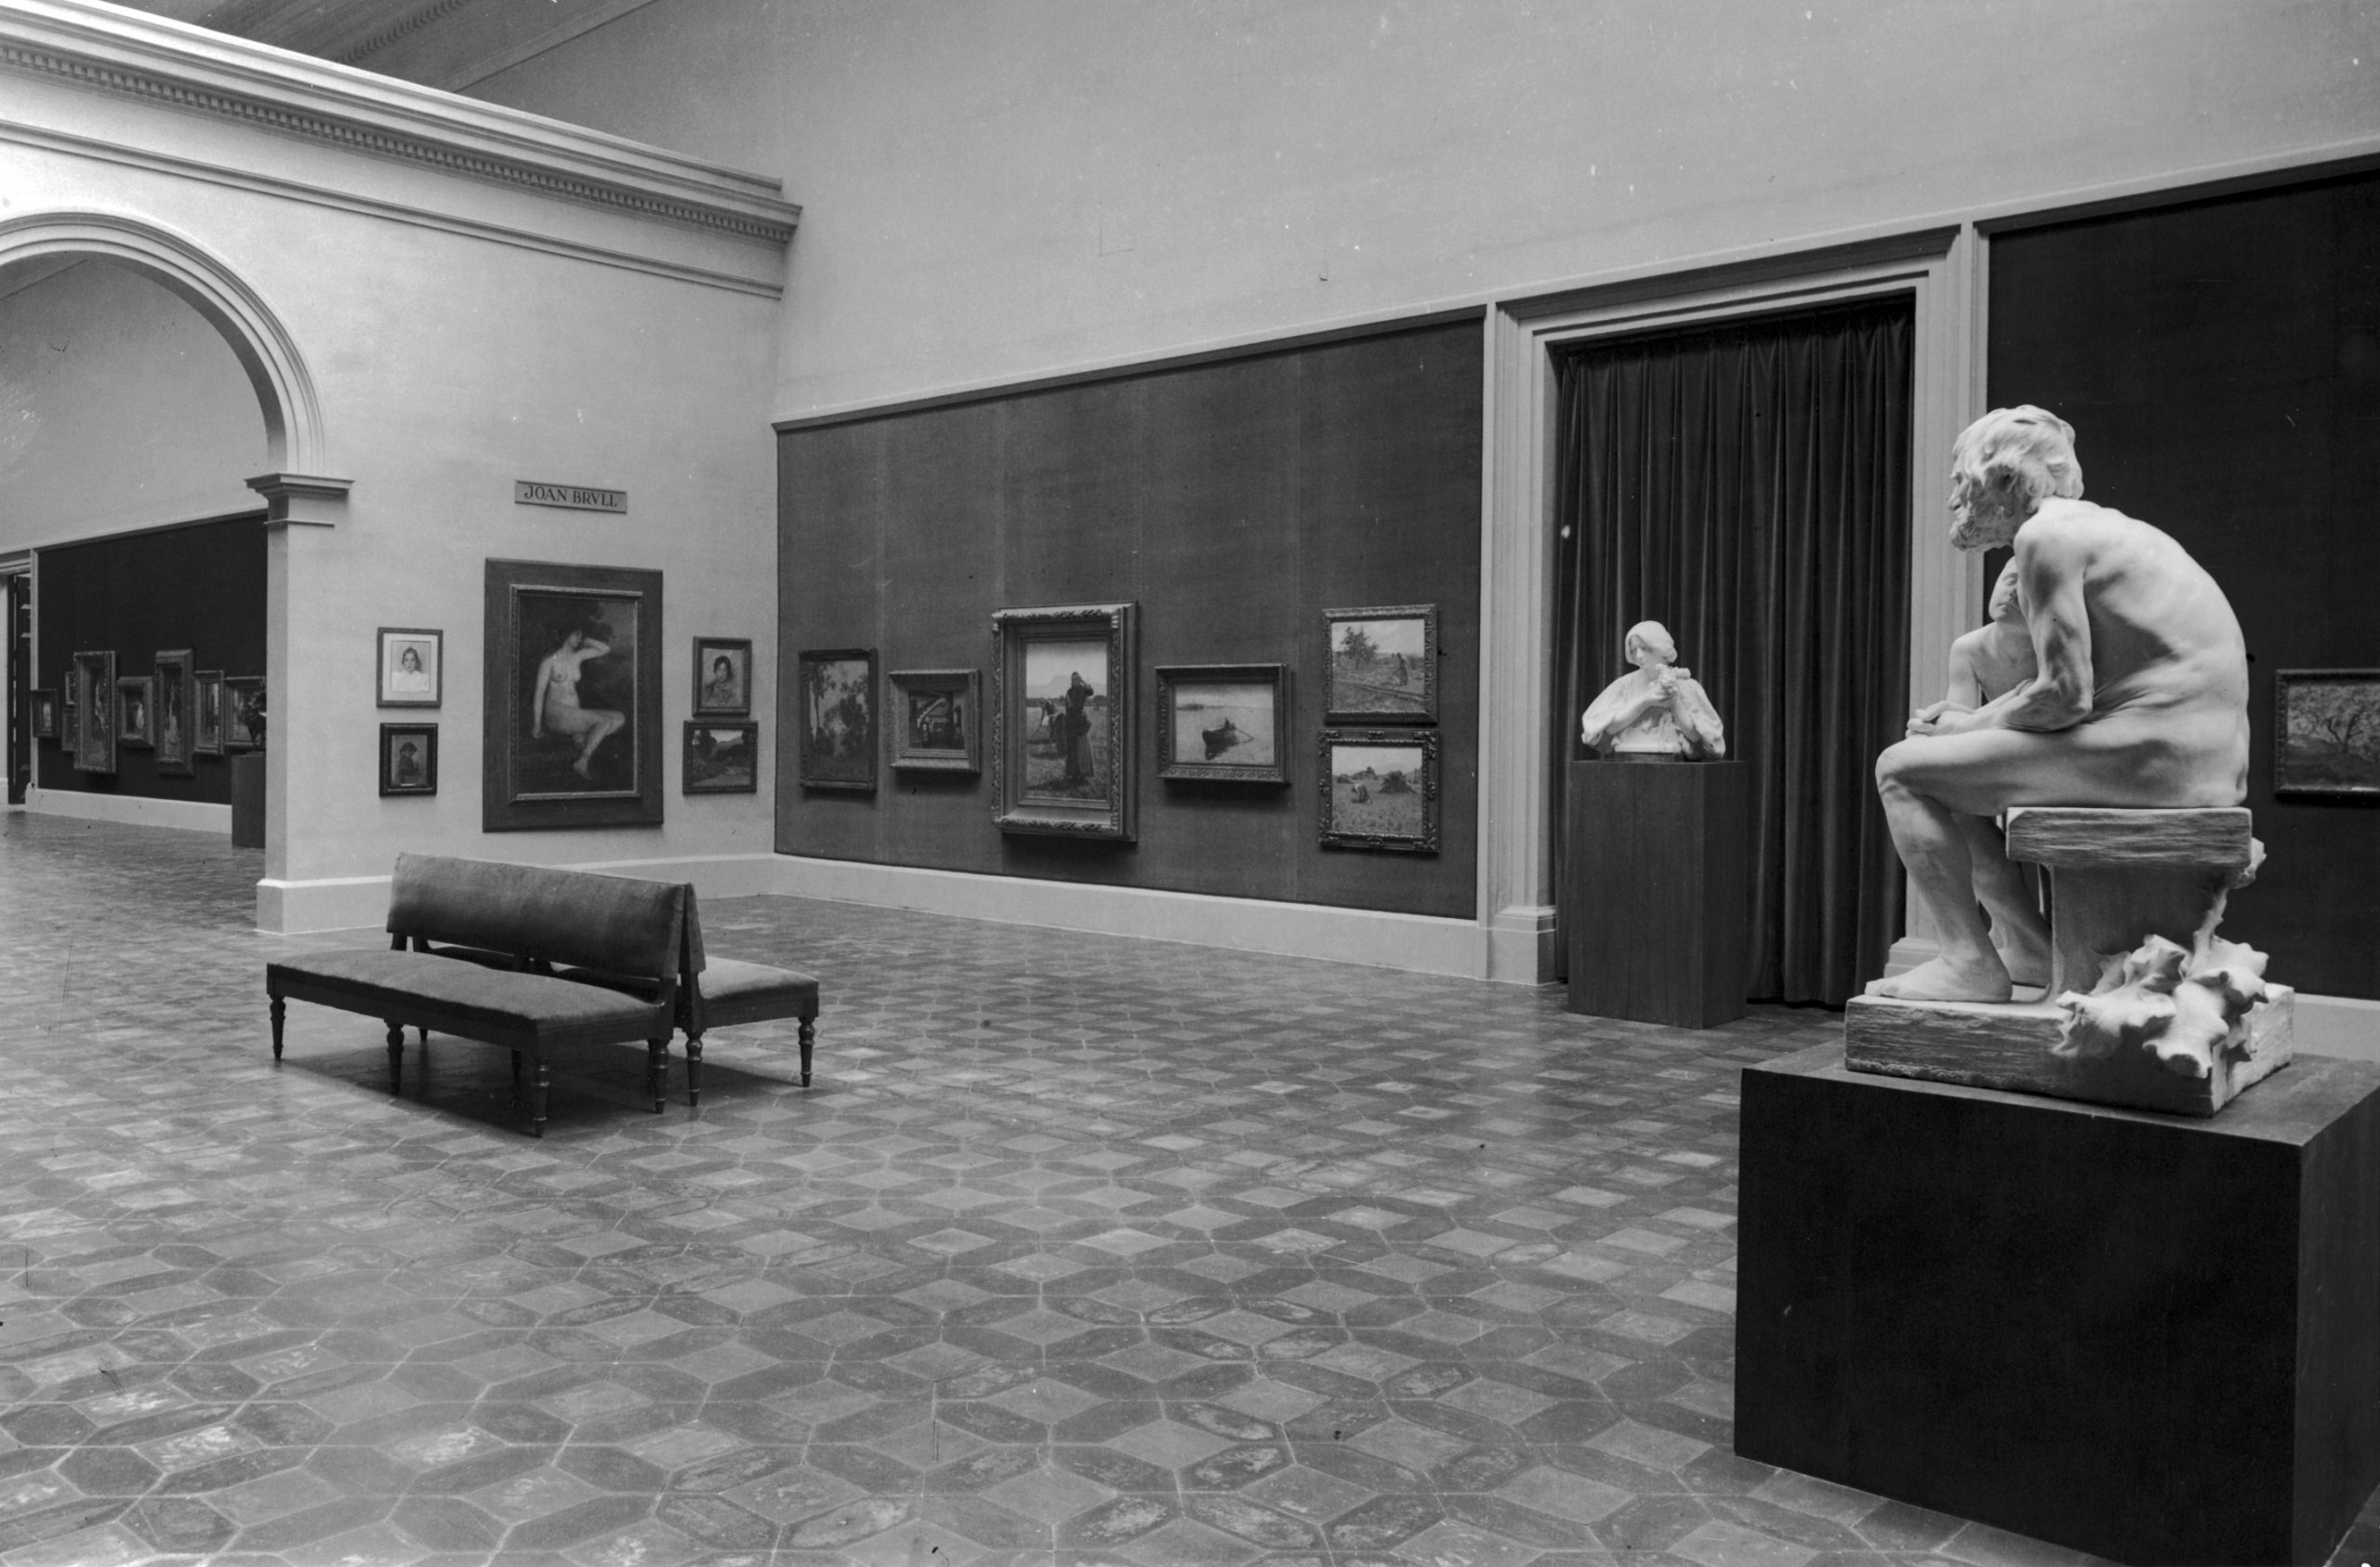 The new facilities of the Museu d’Art de Catalunya made it possible to display the collections in an orderly fashion, by 1934